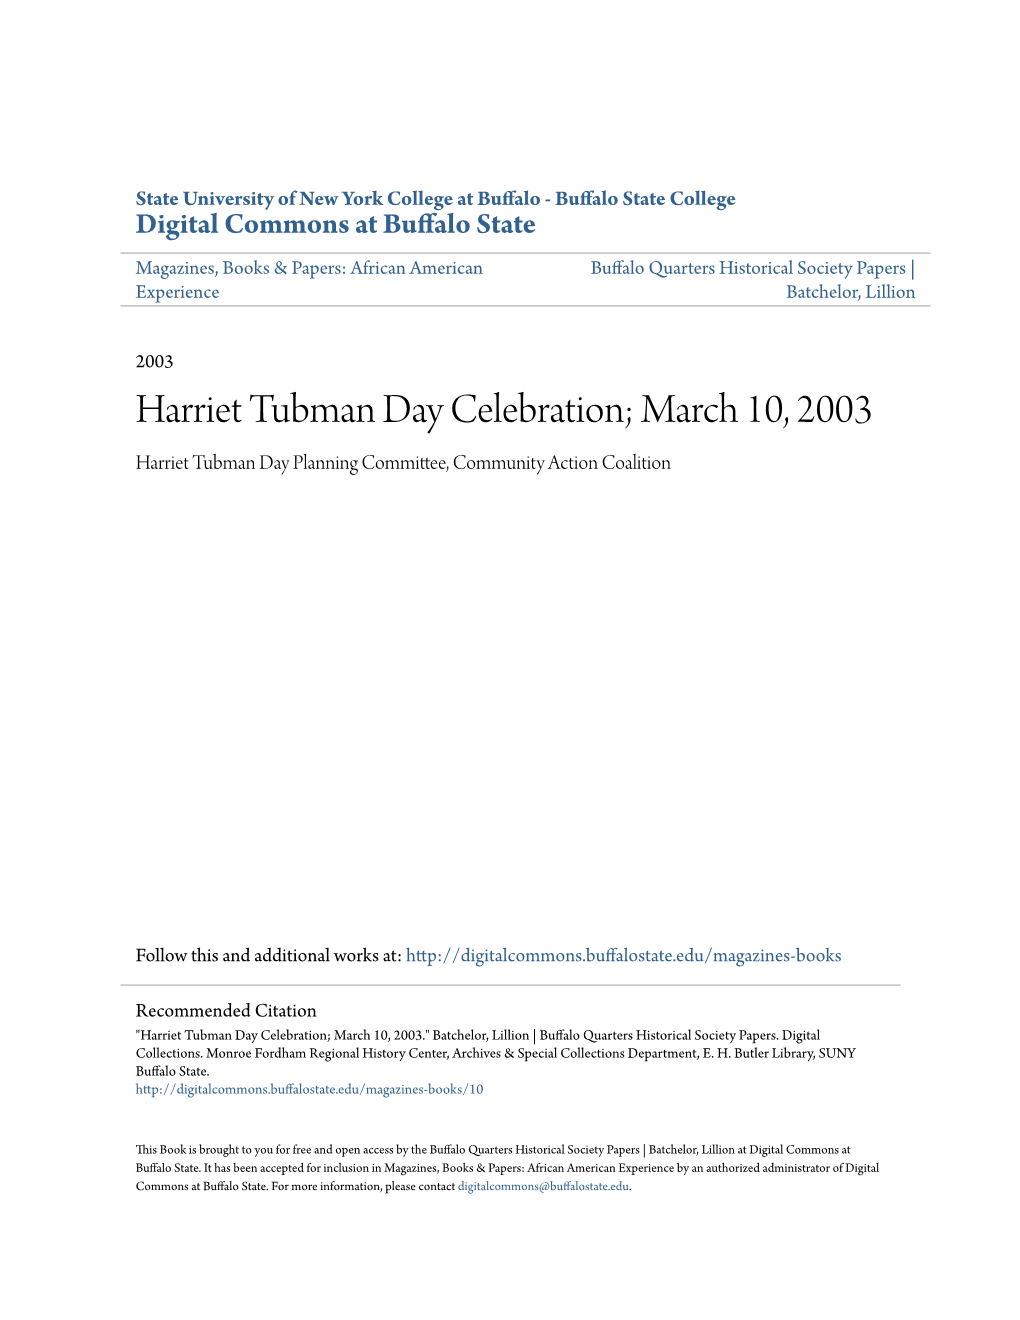 Harriet Tubman Day Celebration; March 10, 2003 Harriet Tubman Day Planning Committee, Community Action Coalition